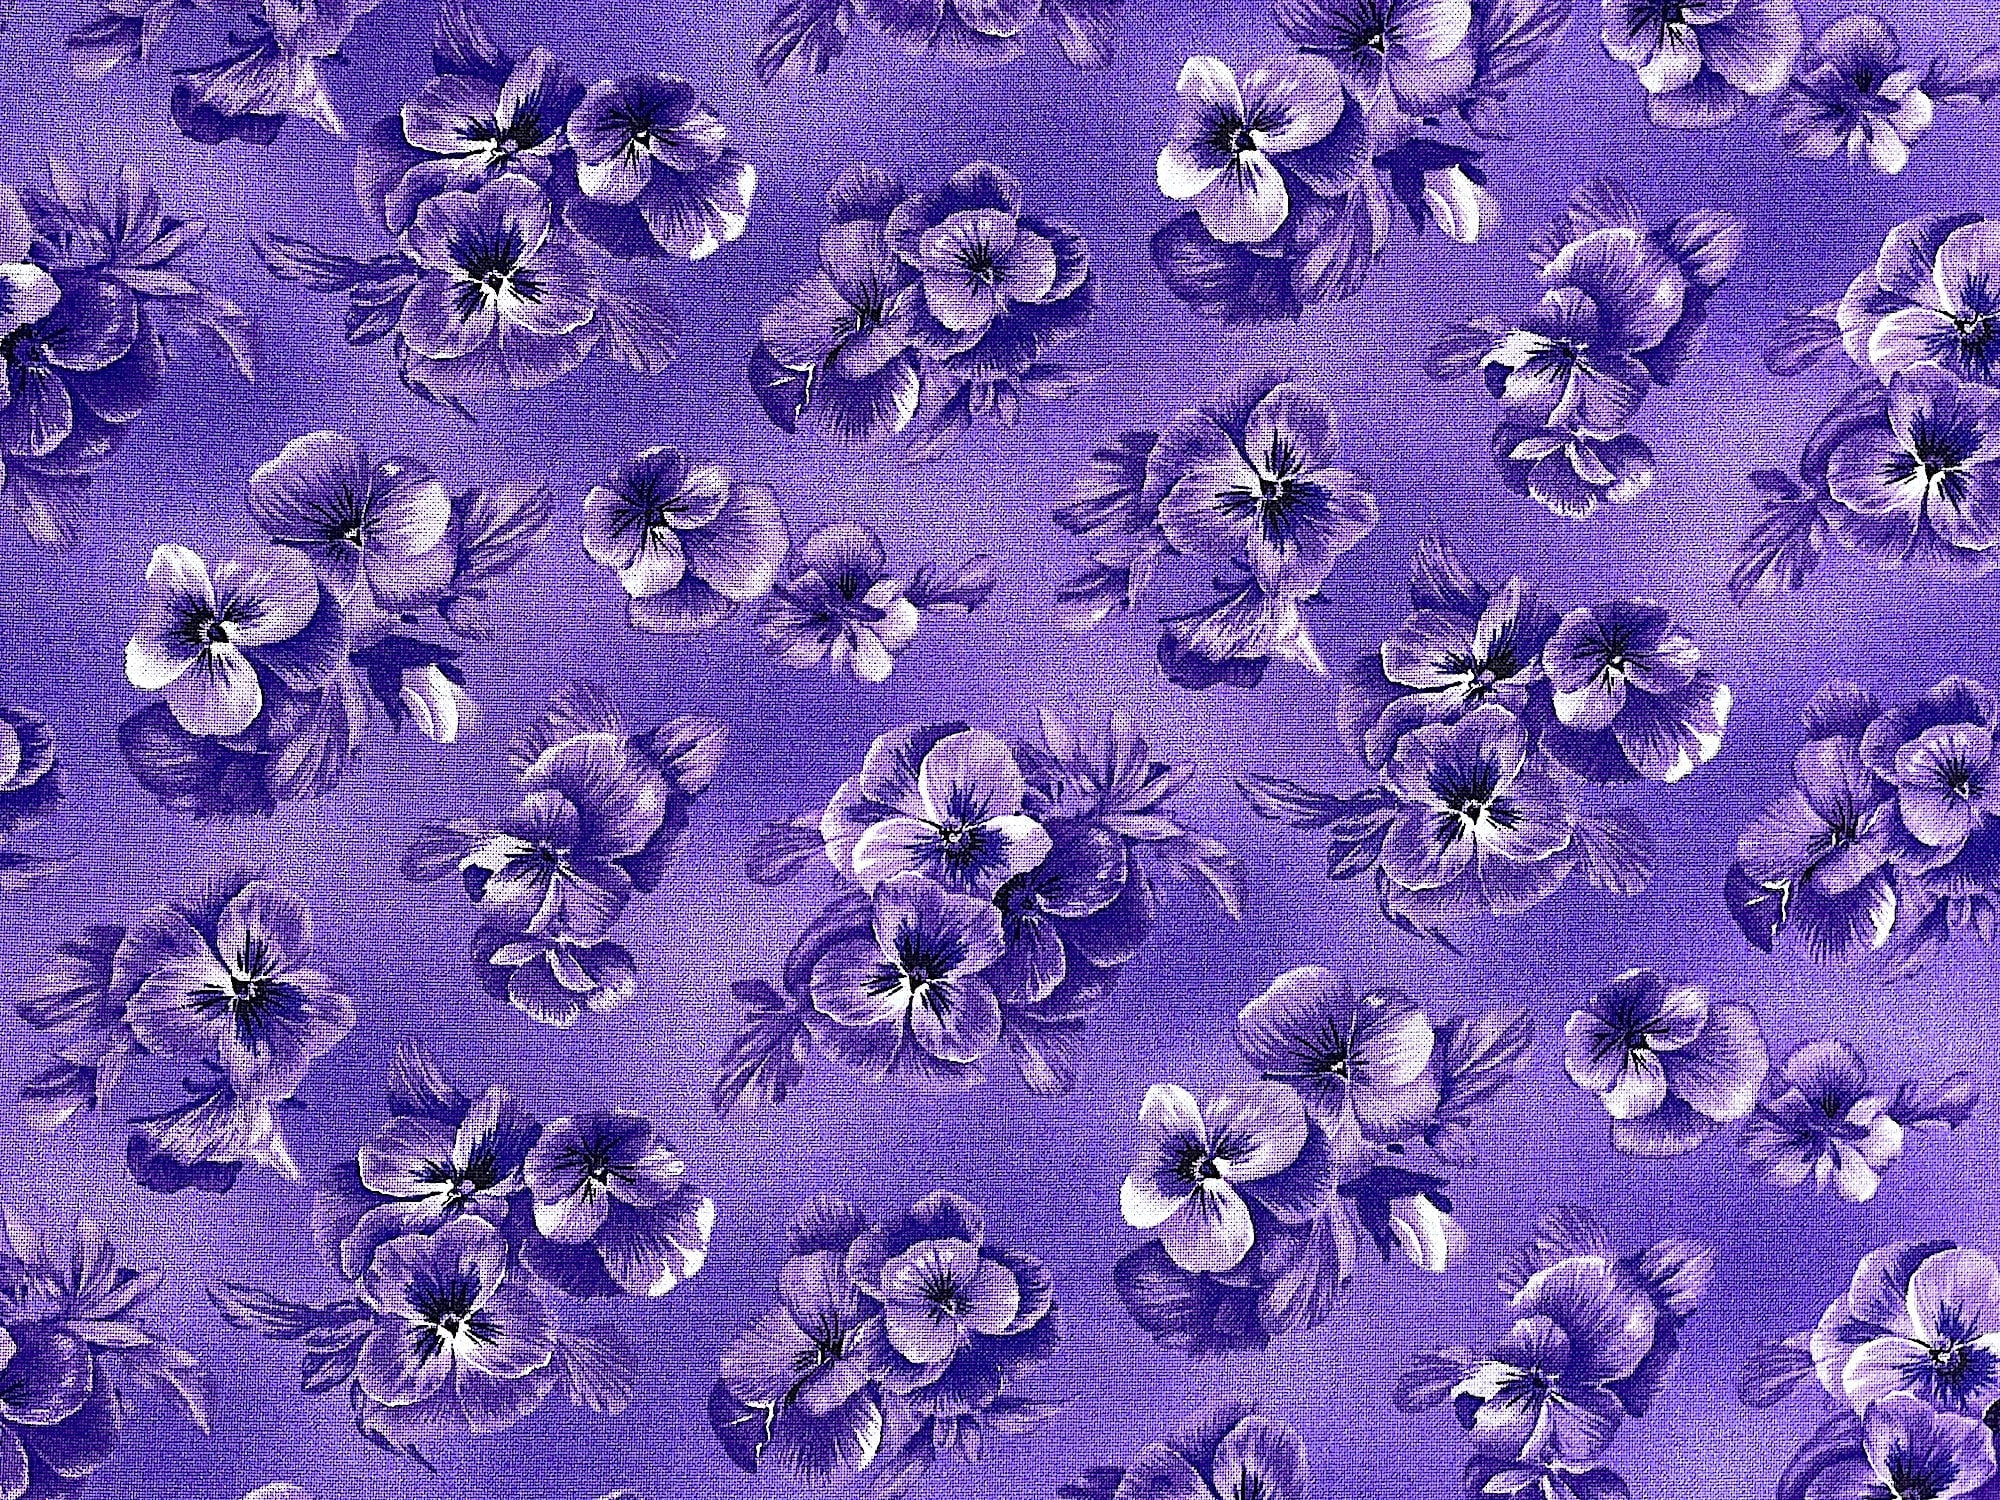 This purple cotton fabric is covered with purple and white pansies. This fabric is part of the Flowerhouse Brightly So collection by Debbie Beaves.